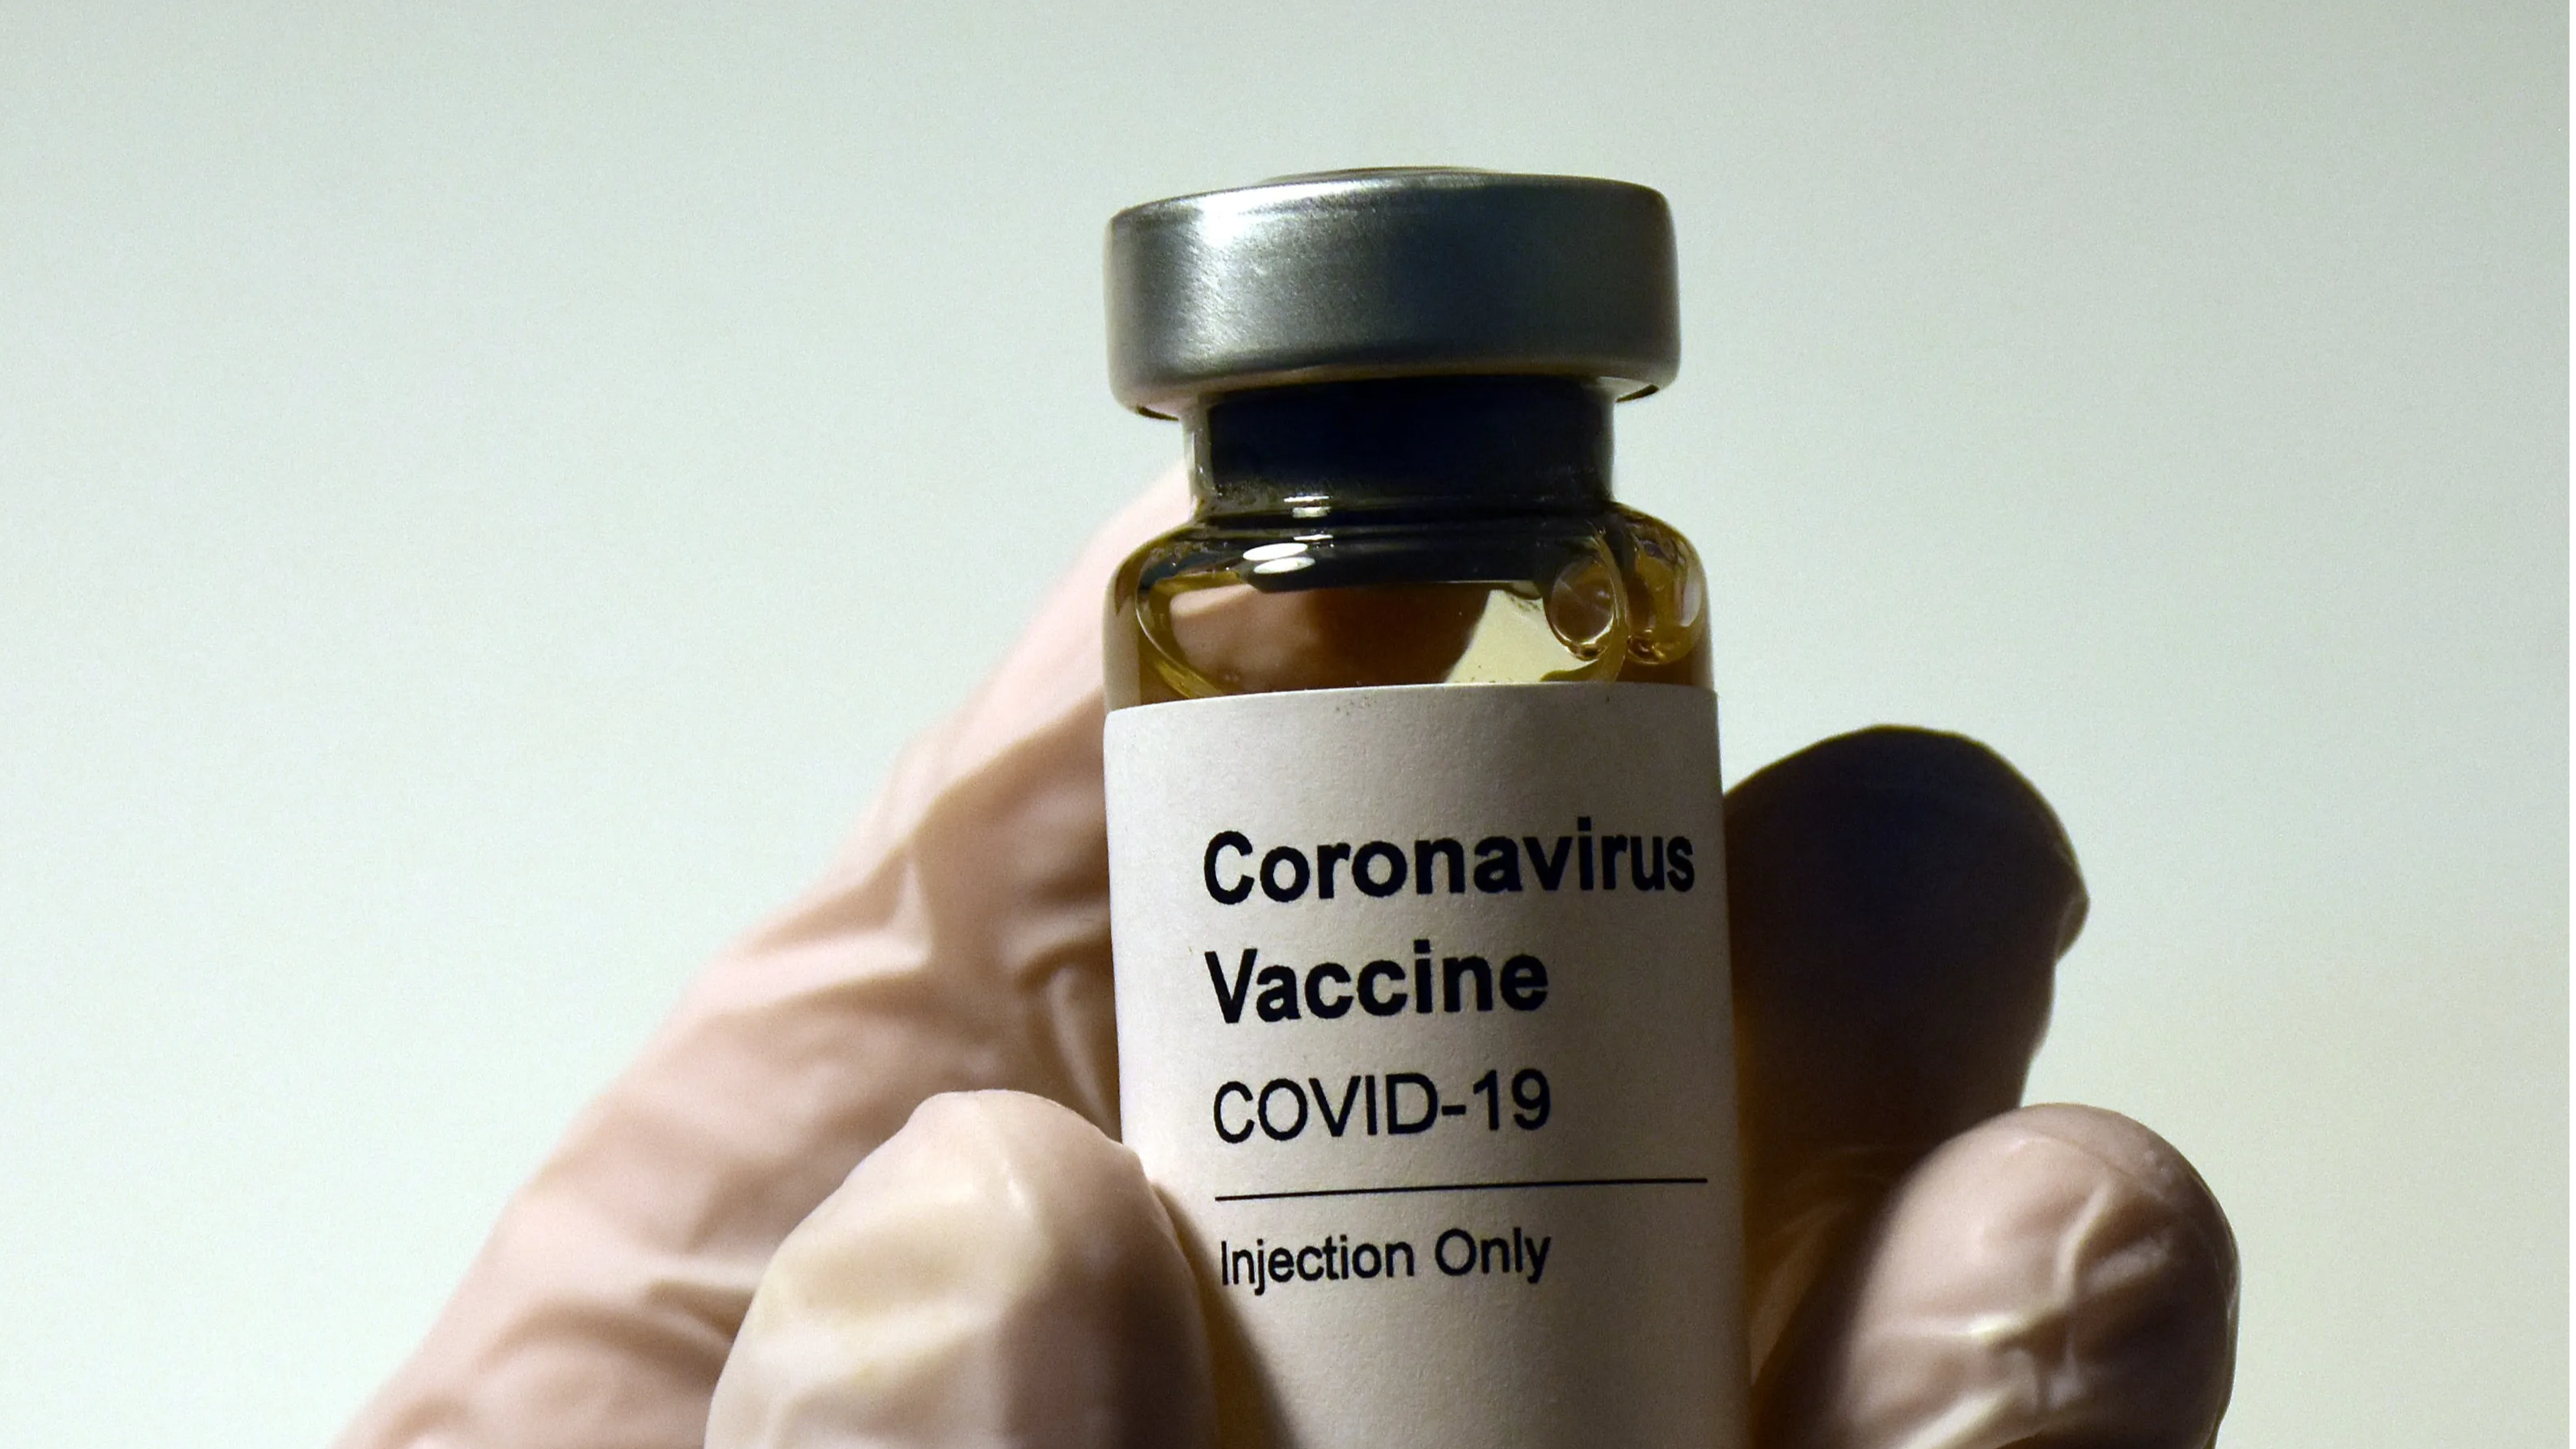 COVID vaccine booster shots not needed for all, says Oxford scientist